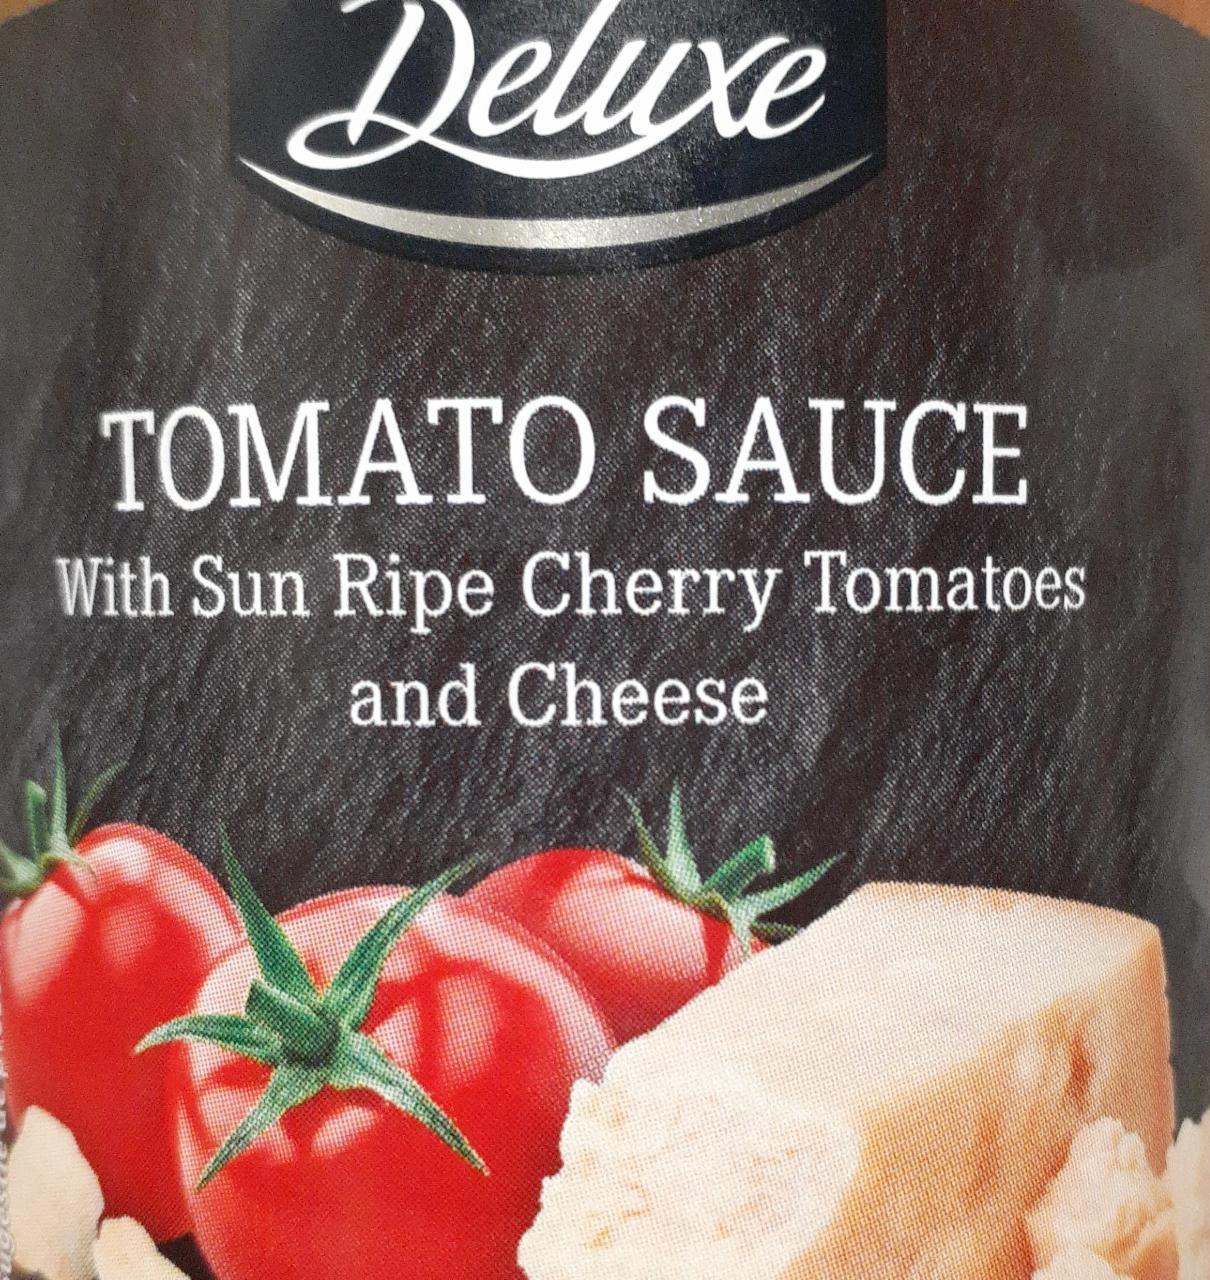 Képek - Tomato sauce with sun ripe cherry tomatoes and cheese Deluxe